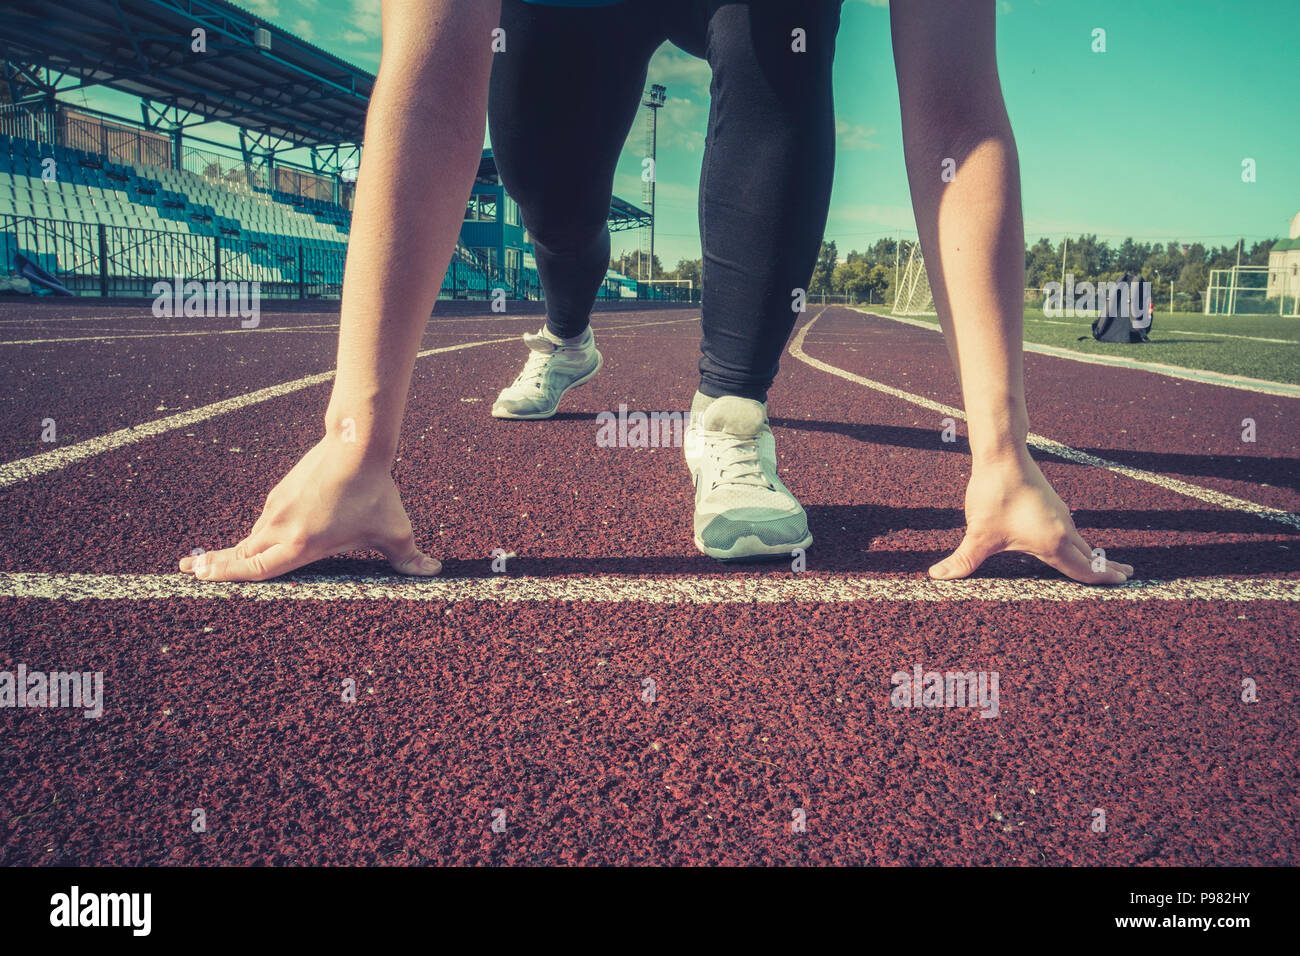 Ready to go. Young fitness girl wearing blue top, black tights, sneakers and pony-tail on the starting line of stadium track, preparing for a run. Hea Stock Photo